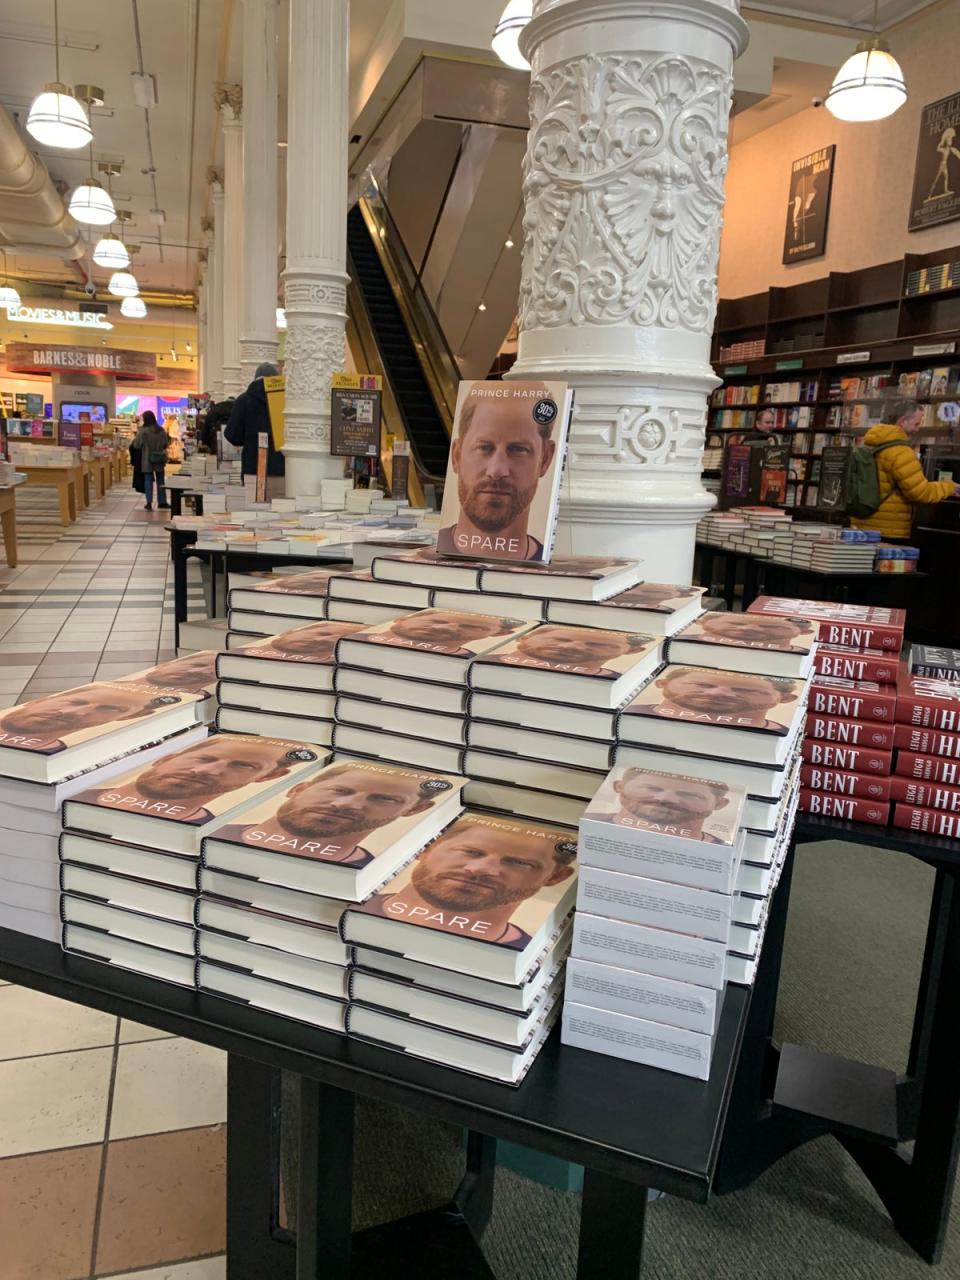 Spare by Prince Harry display in Barnes and Noble (Credit: Meredith Clark)